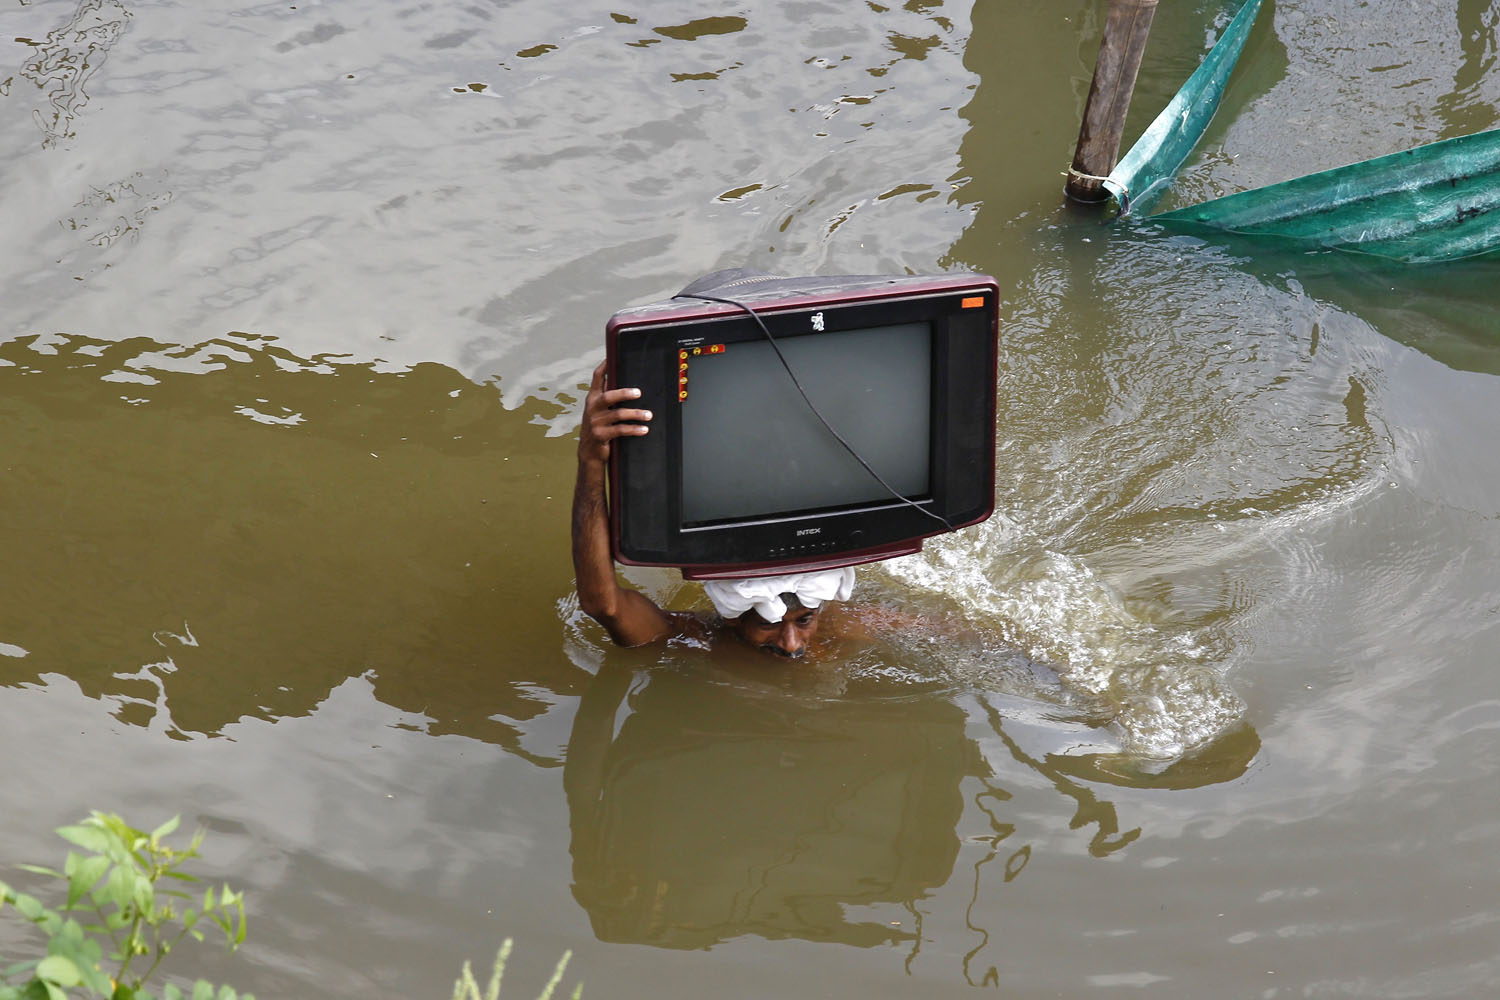 Aug. 1, 2013. A flood-affected man carries his television set to a safer place, after heavy monsoon rains caused a rise in the water levels of the river Ganges, in the northern Indian city of Allahabad.